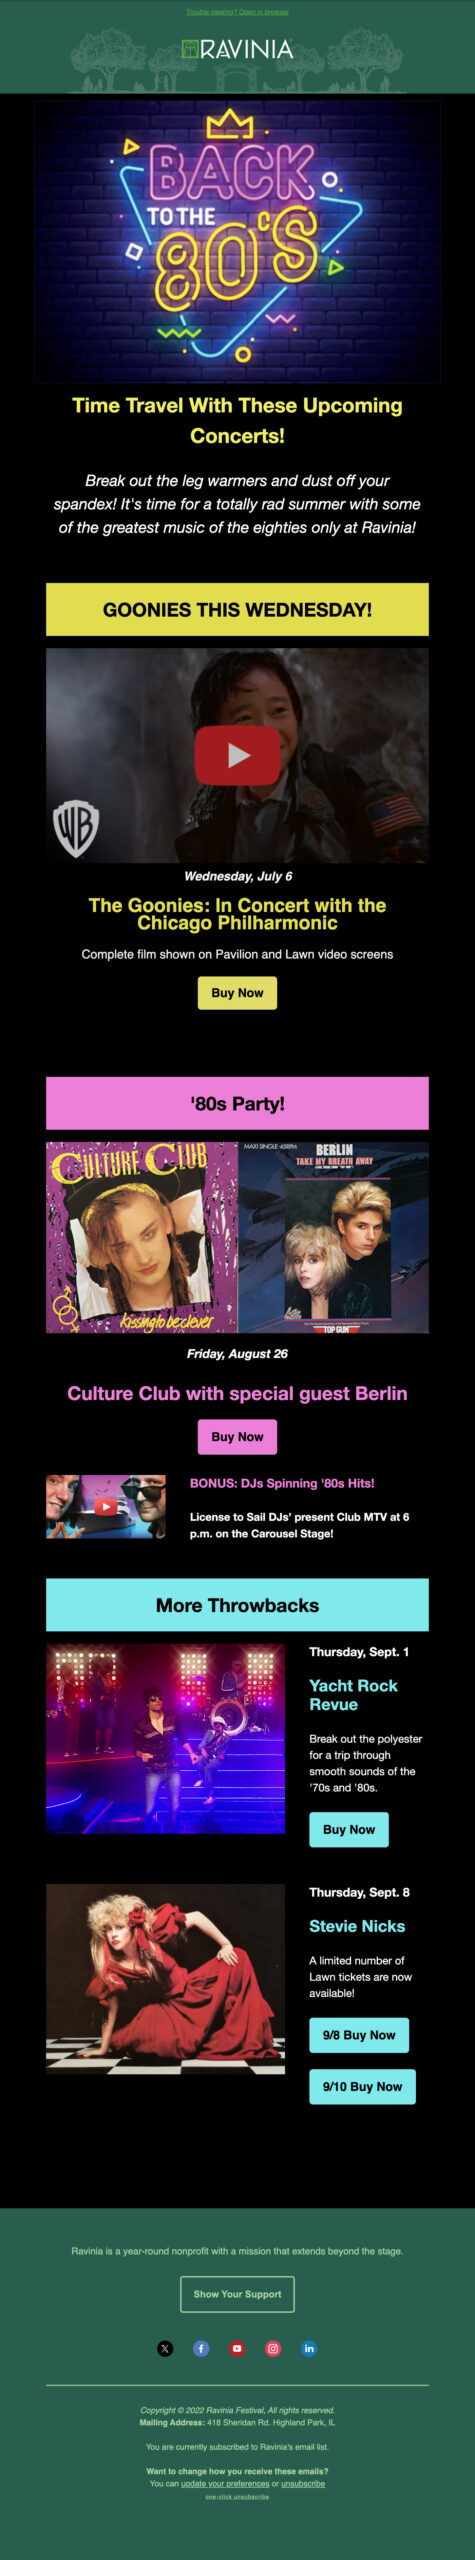 Long screenshot of an email promoting 80s concerts at Ravinia including Goonies movie, Culture Club and Stevie Nicks